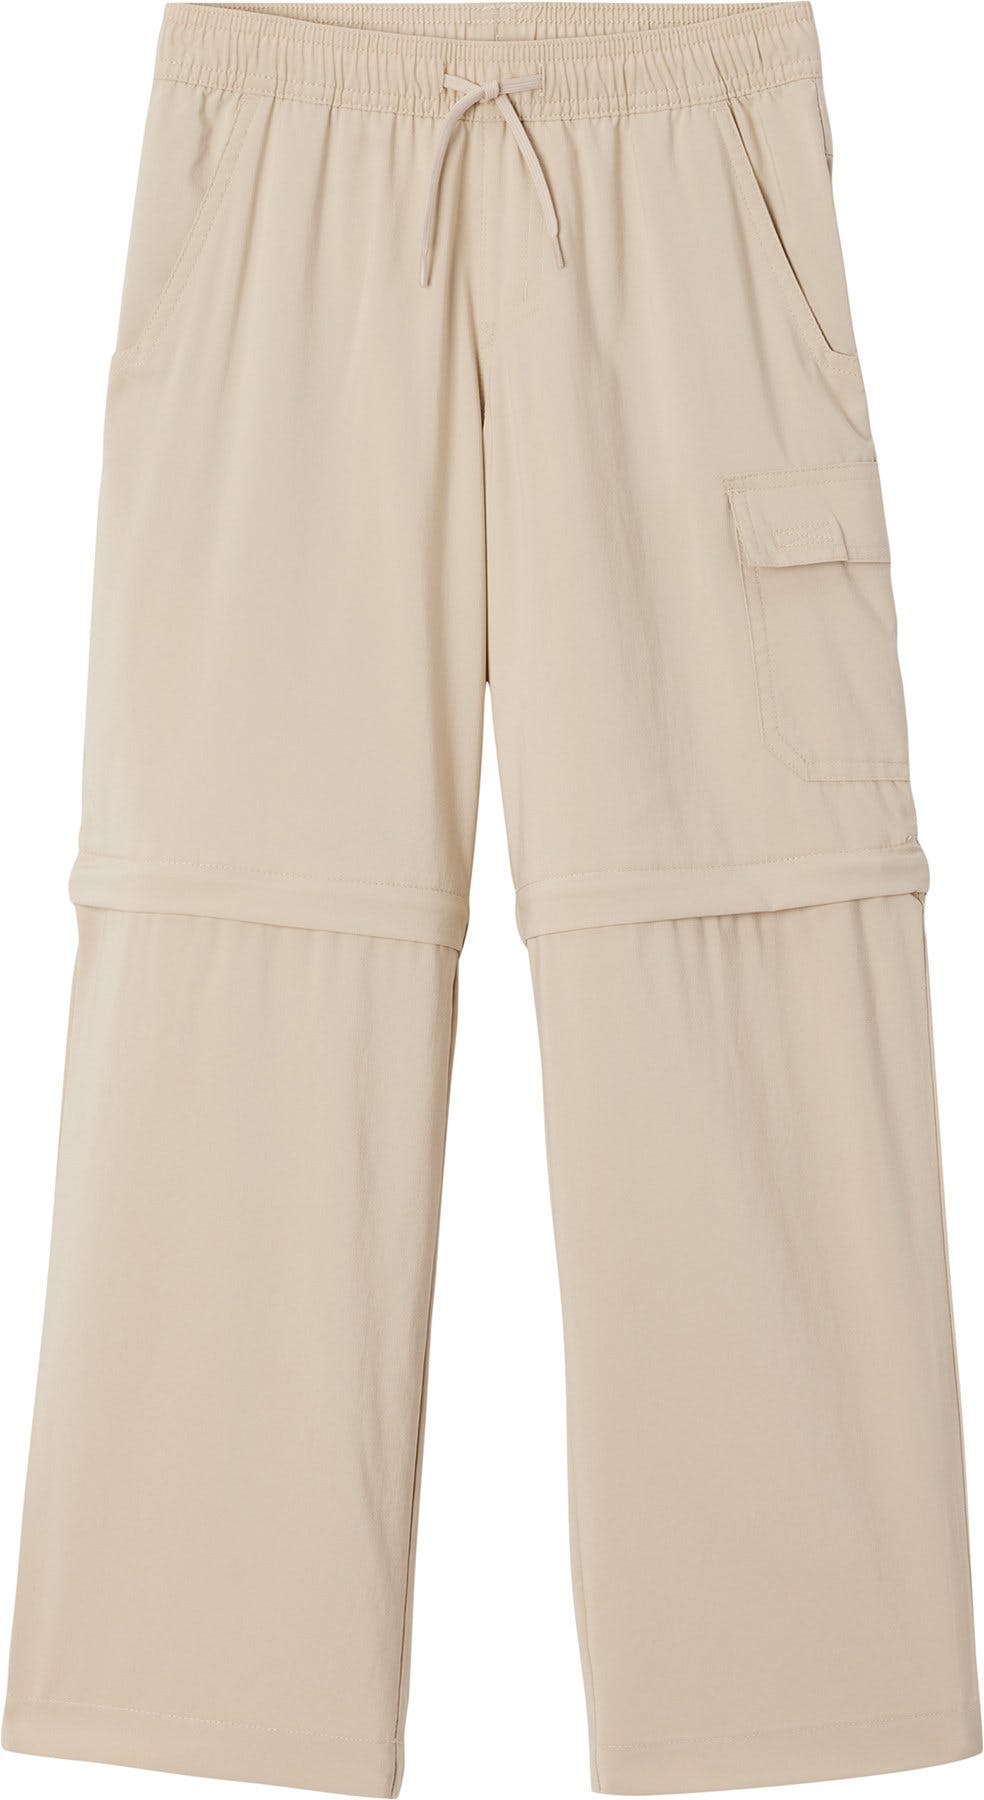 Product image for Silver Ridge Utility Convertible Pant - Boys